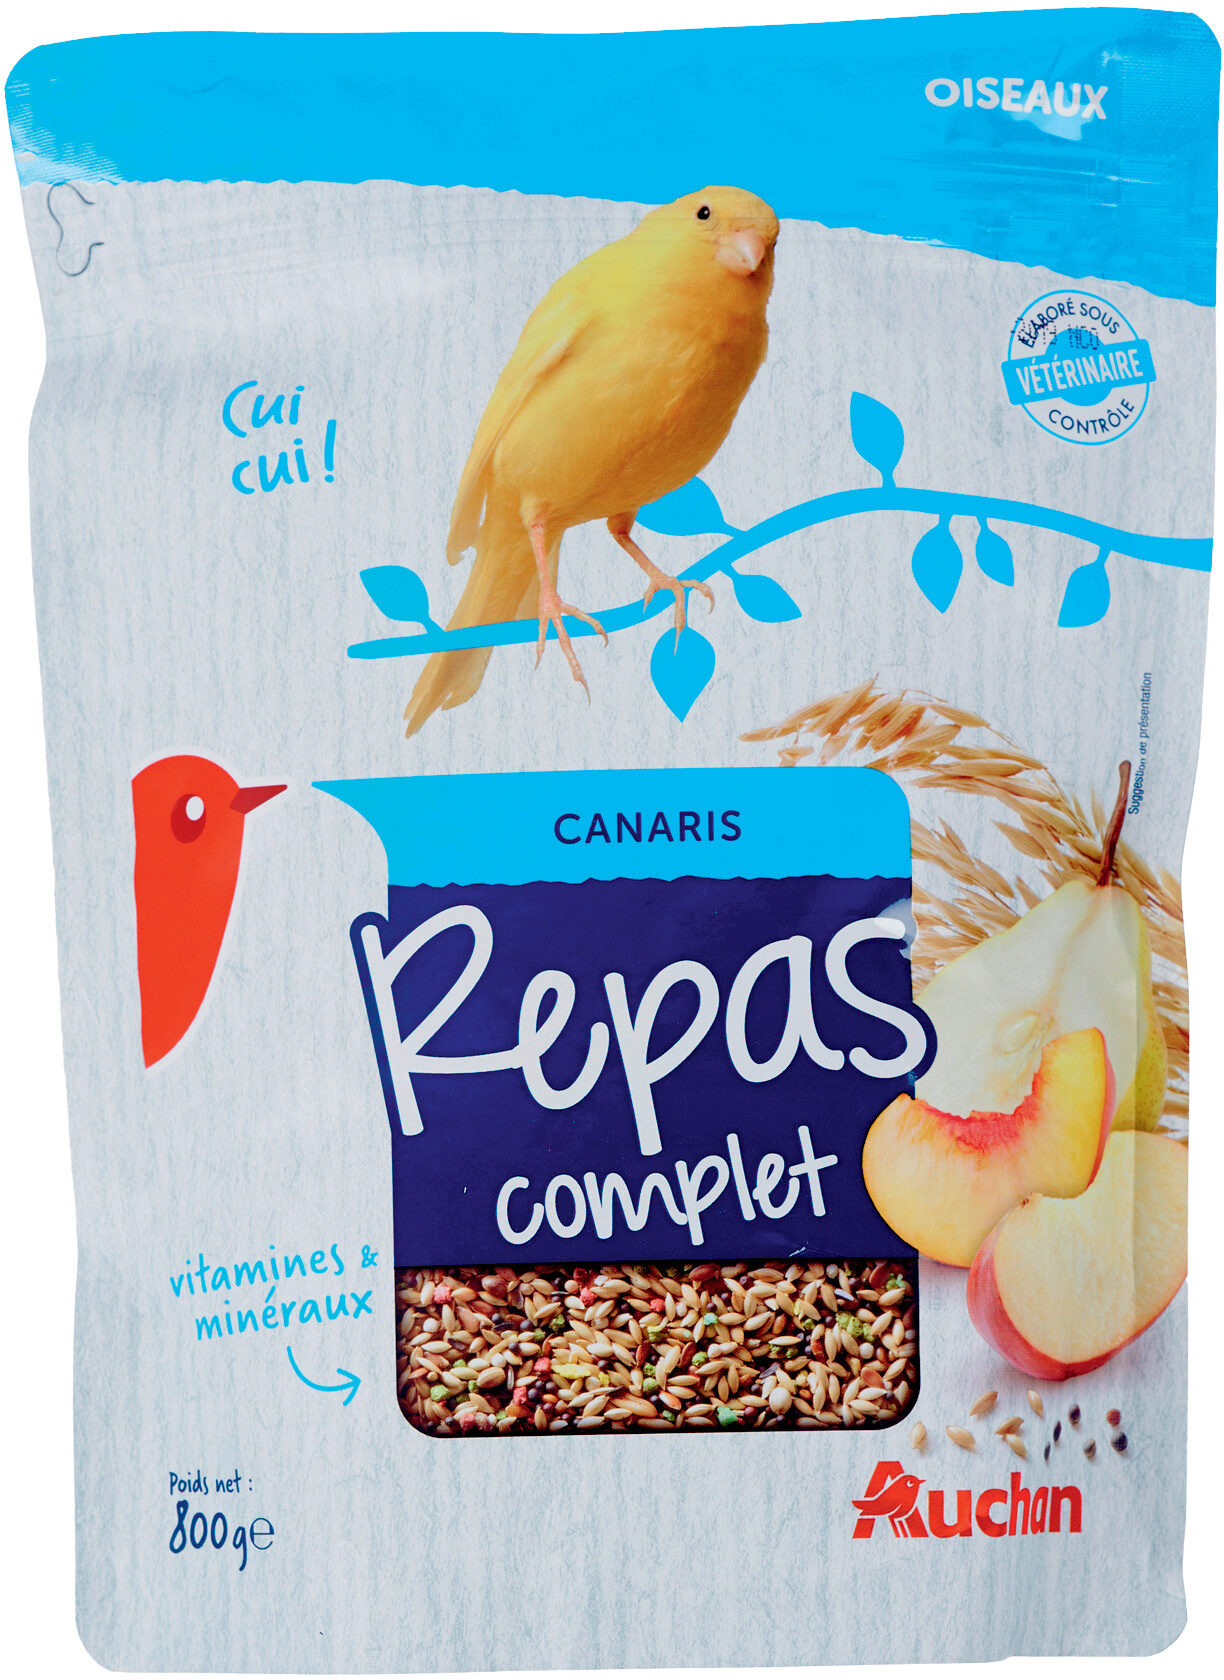 Canaris Repas complet - Product - fr